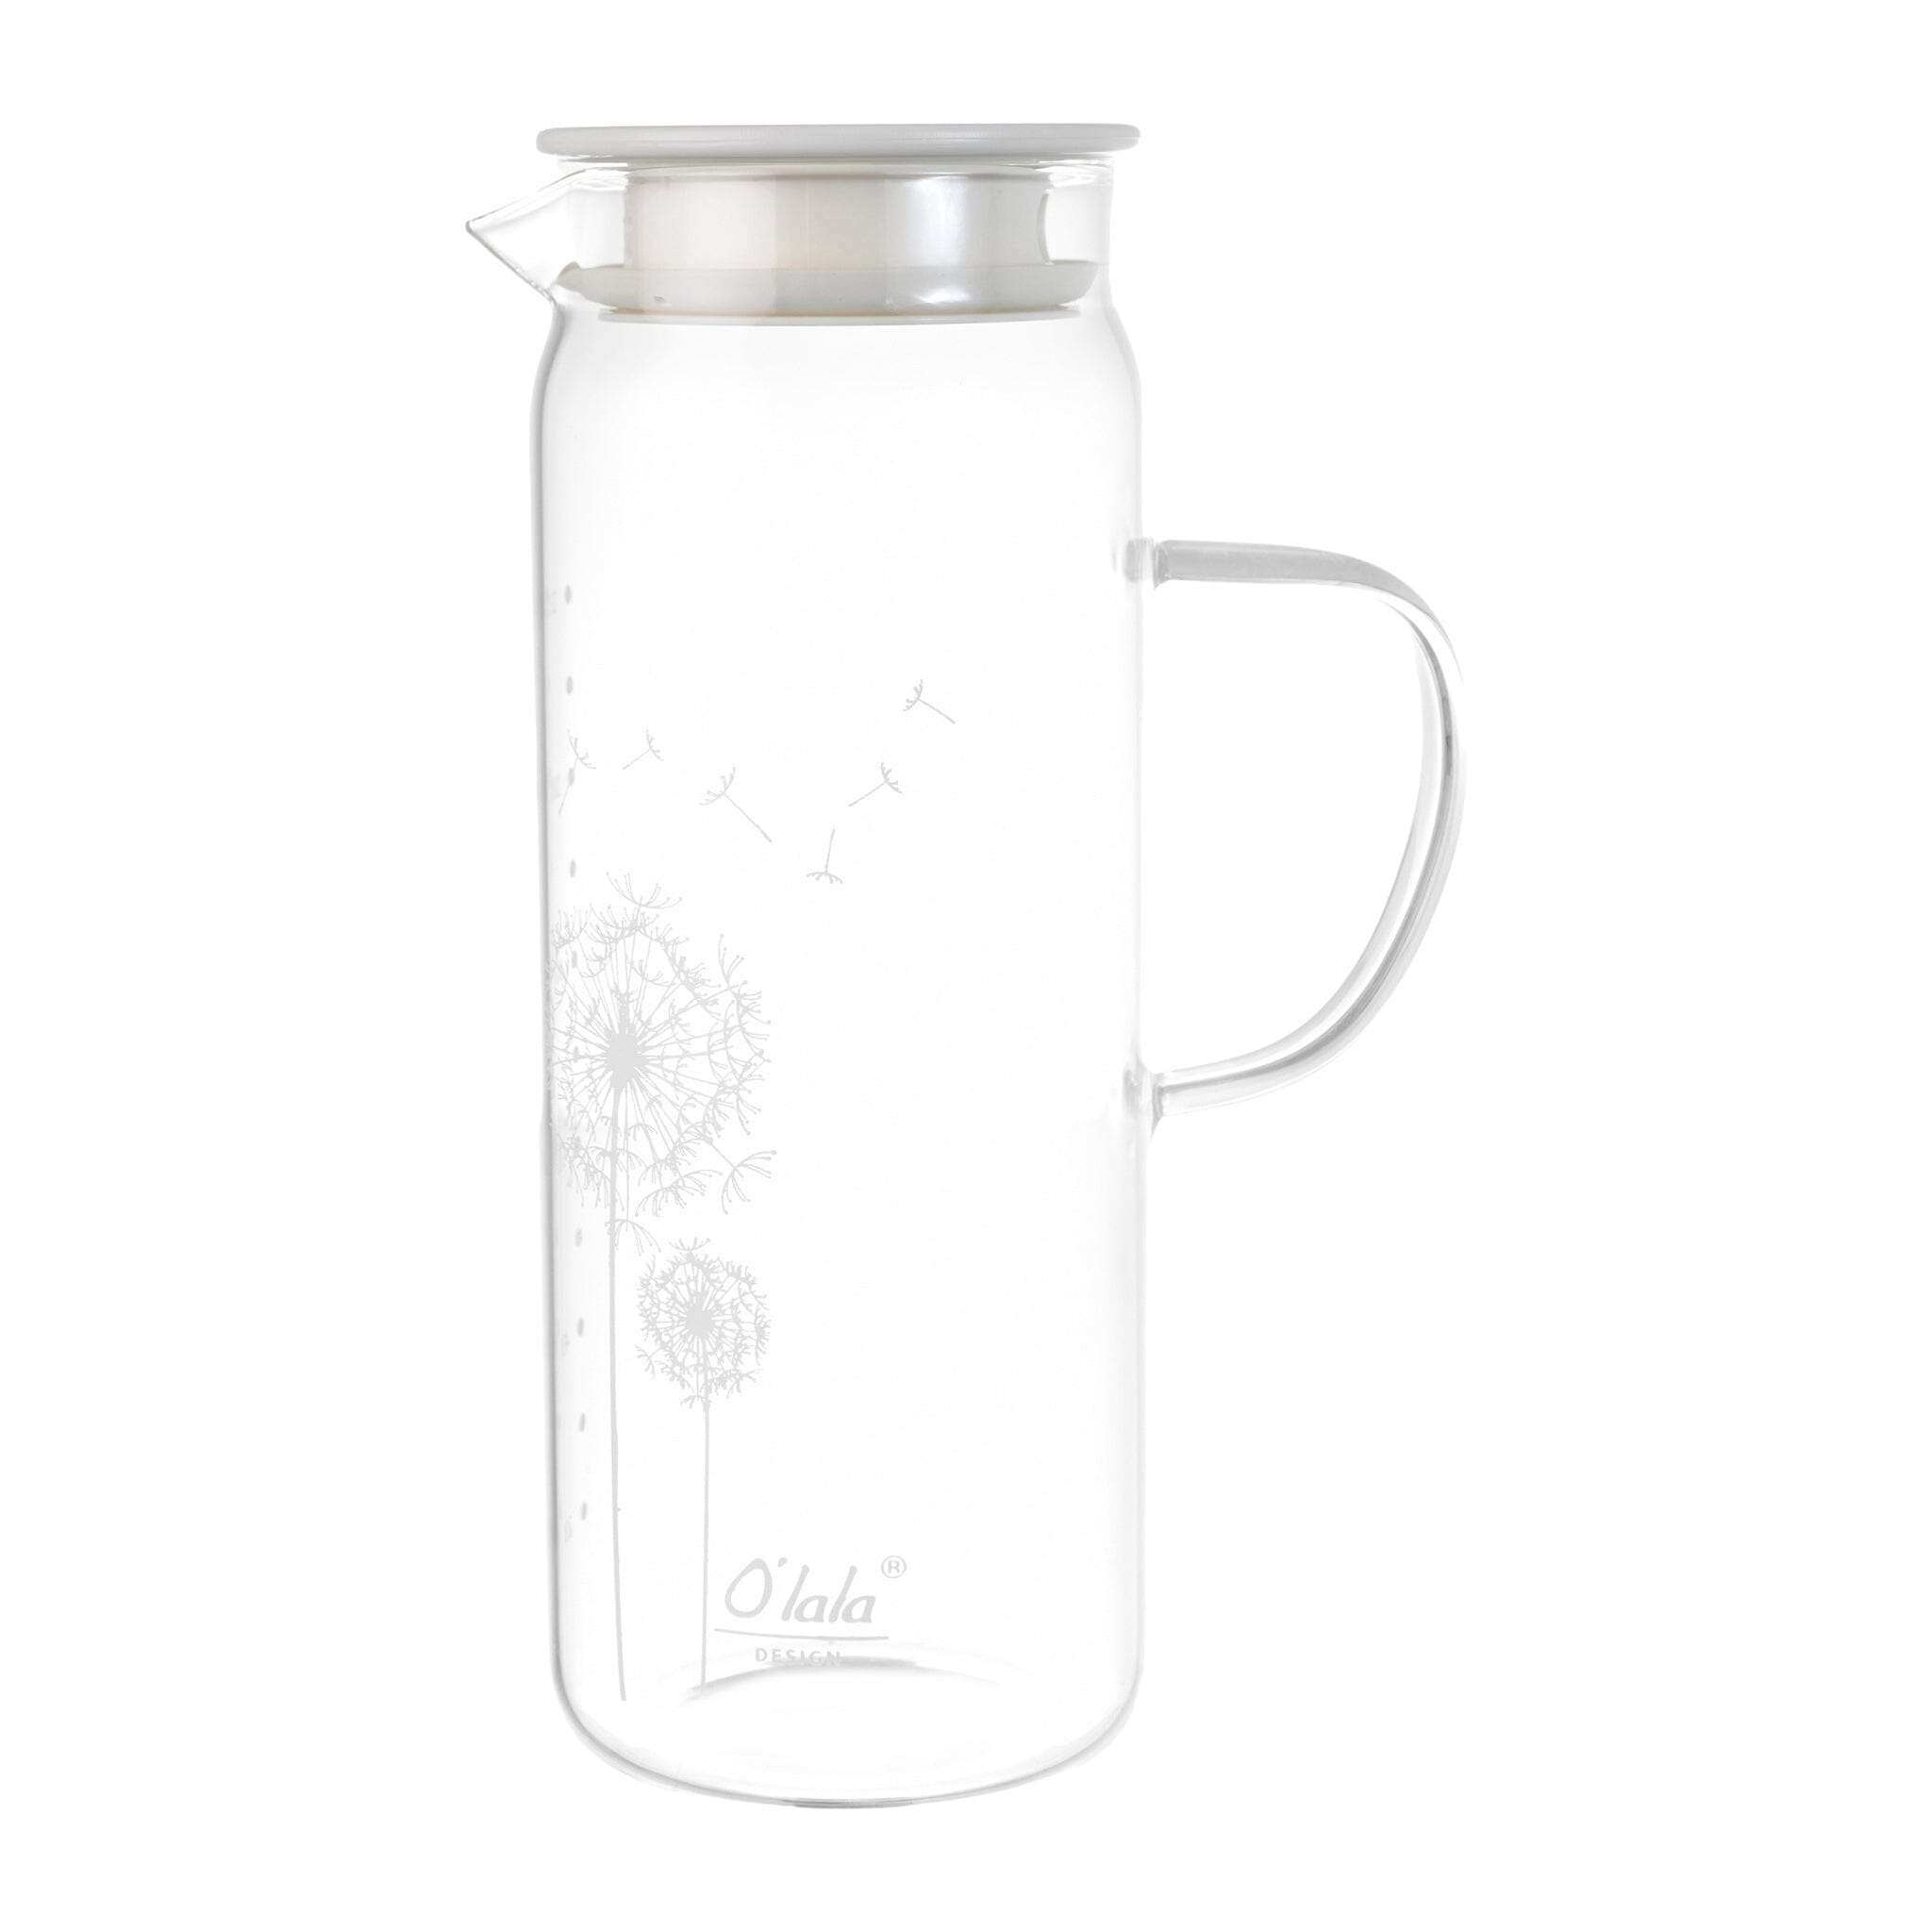 O'lala - Glass Carafe With Stainless Steel Cover - White - 25cm - 520008136